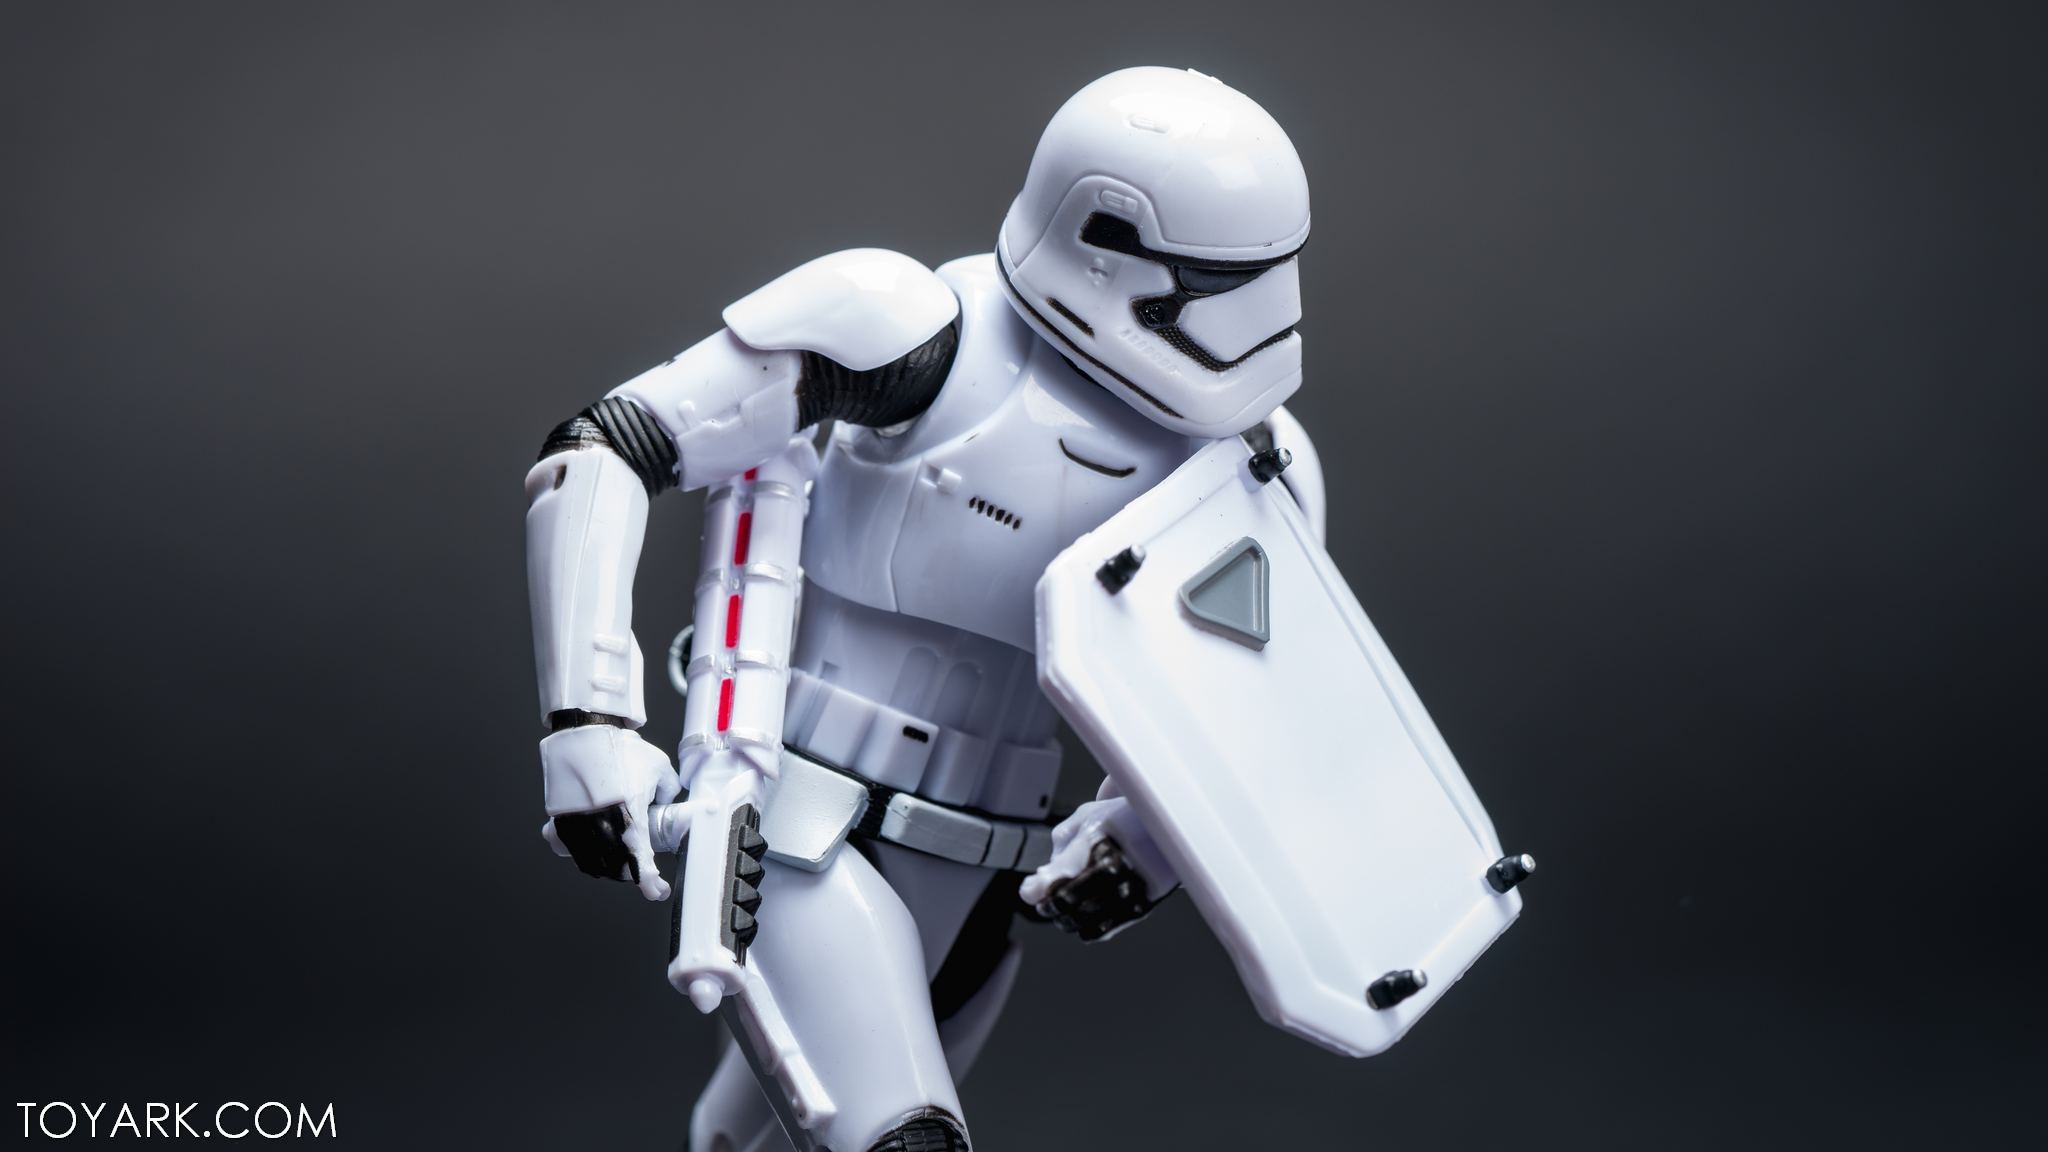 cool stormtrooper wallpaper,robot,action figure,toy,technology,fictional character